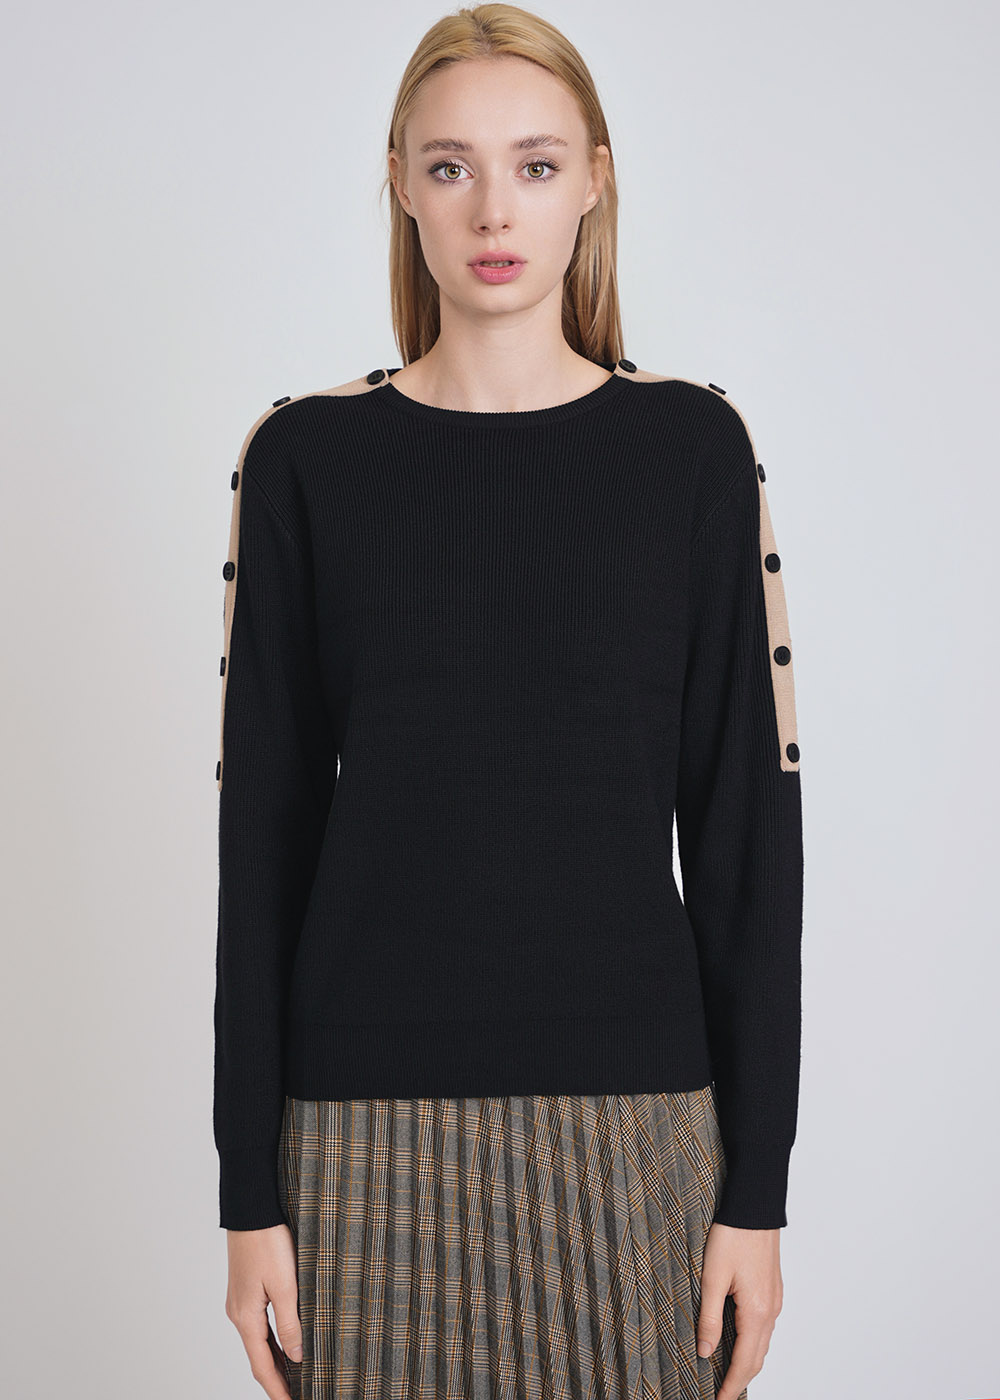 Trendy Black Sweater: Knit Texture & Sleeve Buttons